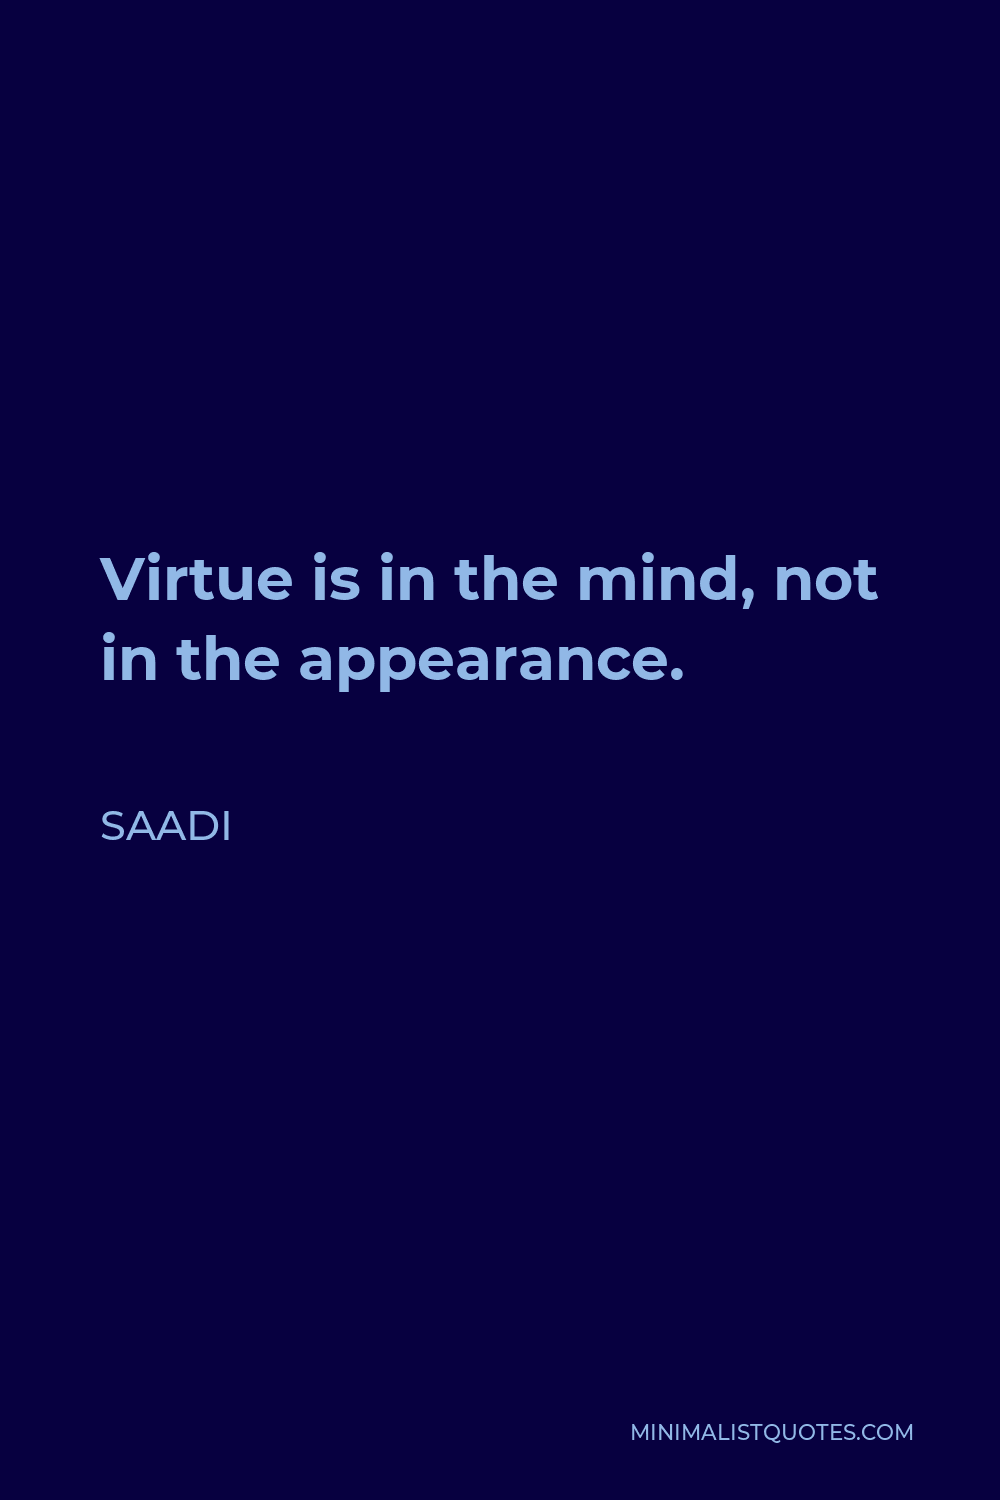 Saadi Quote - Virtue is in the mind, not in the appearance.